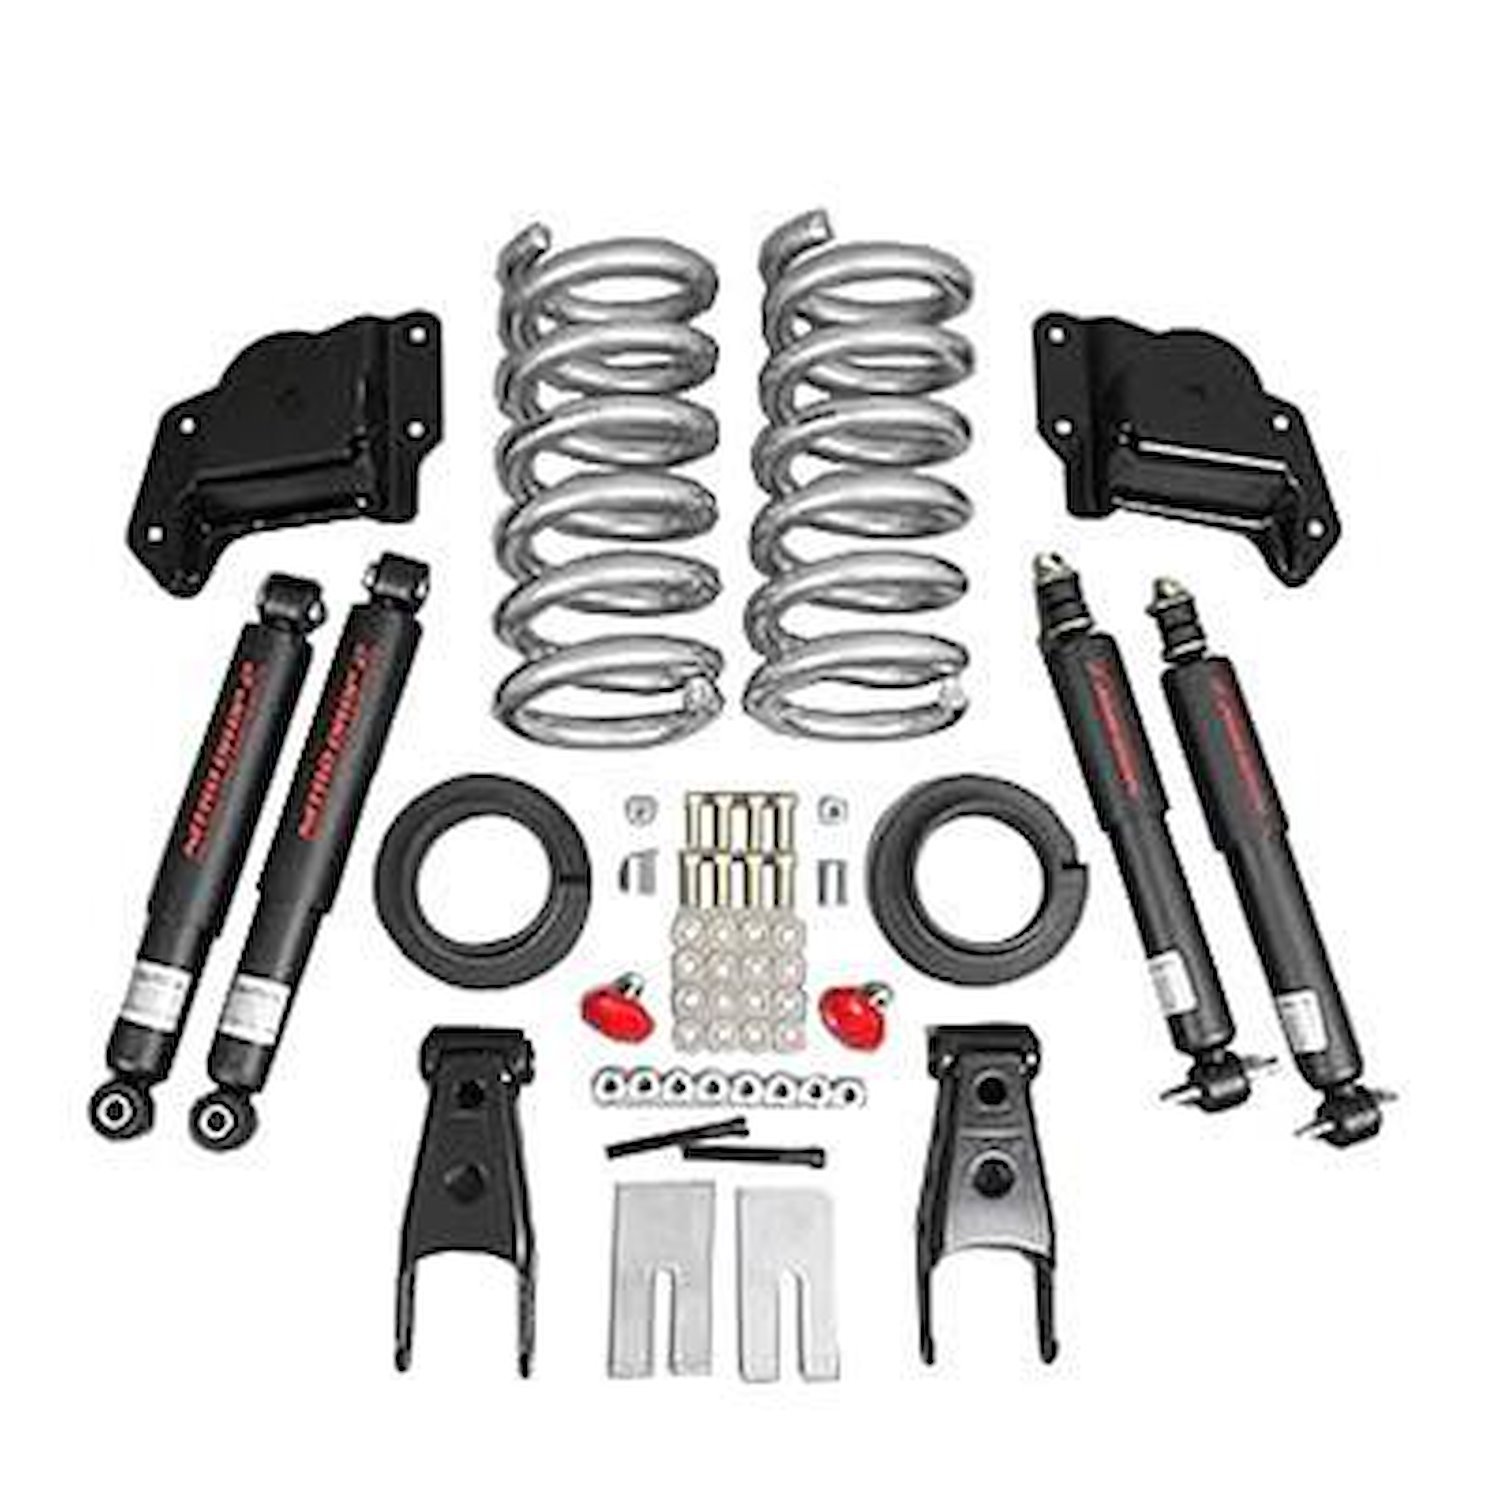 Complete Lowering Kit for 2004-2008 Ford F-150 (All Cabs, 4WD)